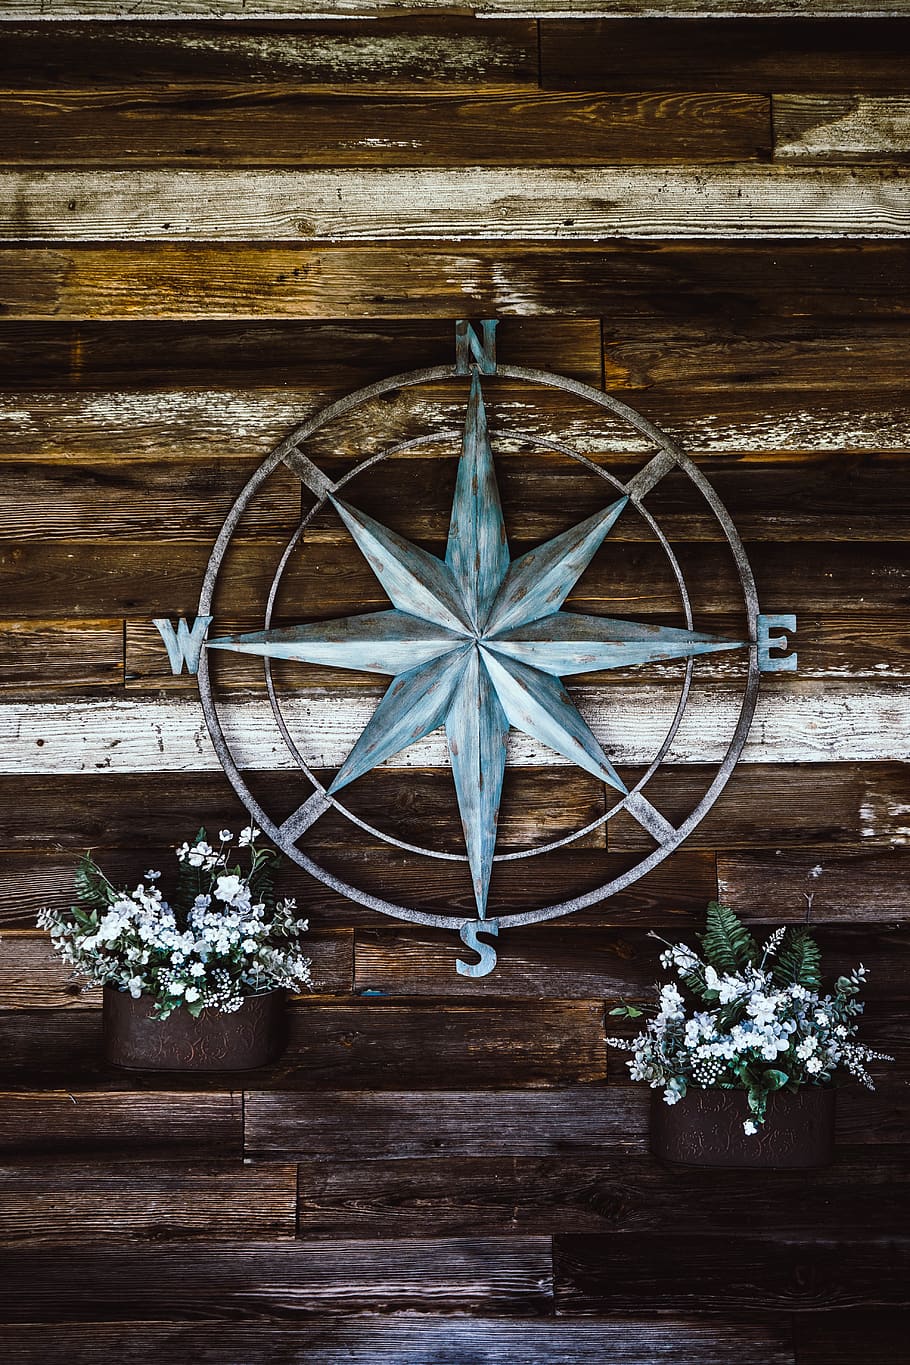 hd wallpaper compass wood west south easte directions vintage map wallpaper flare compass wood west south easte